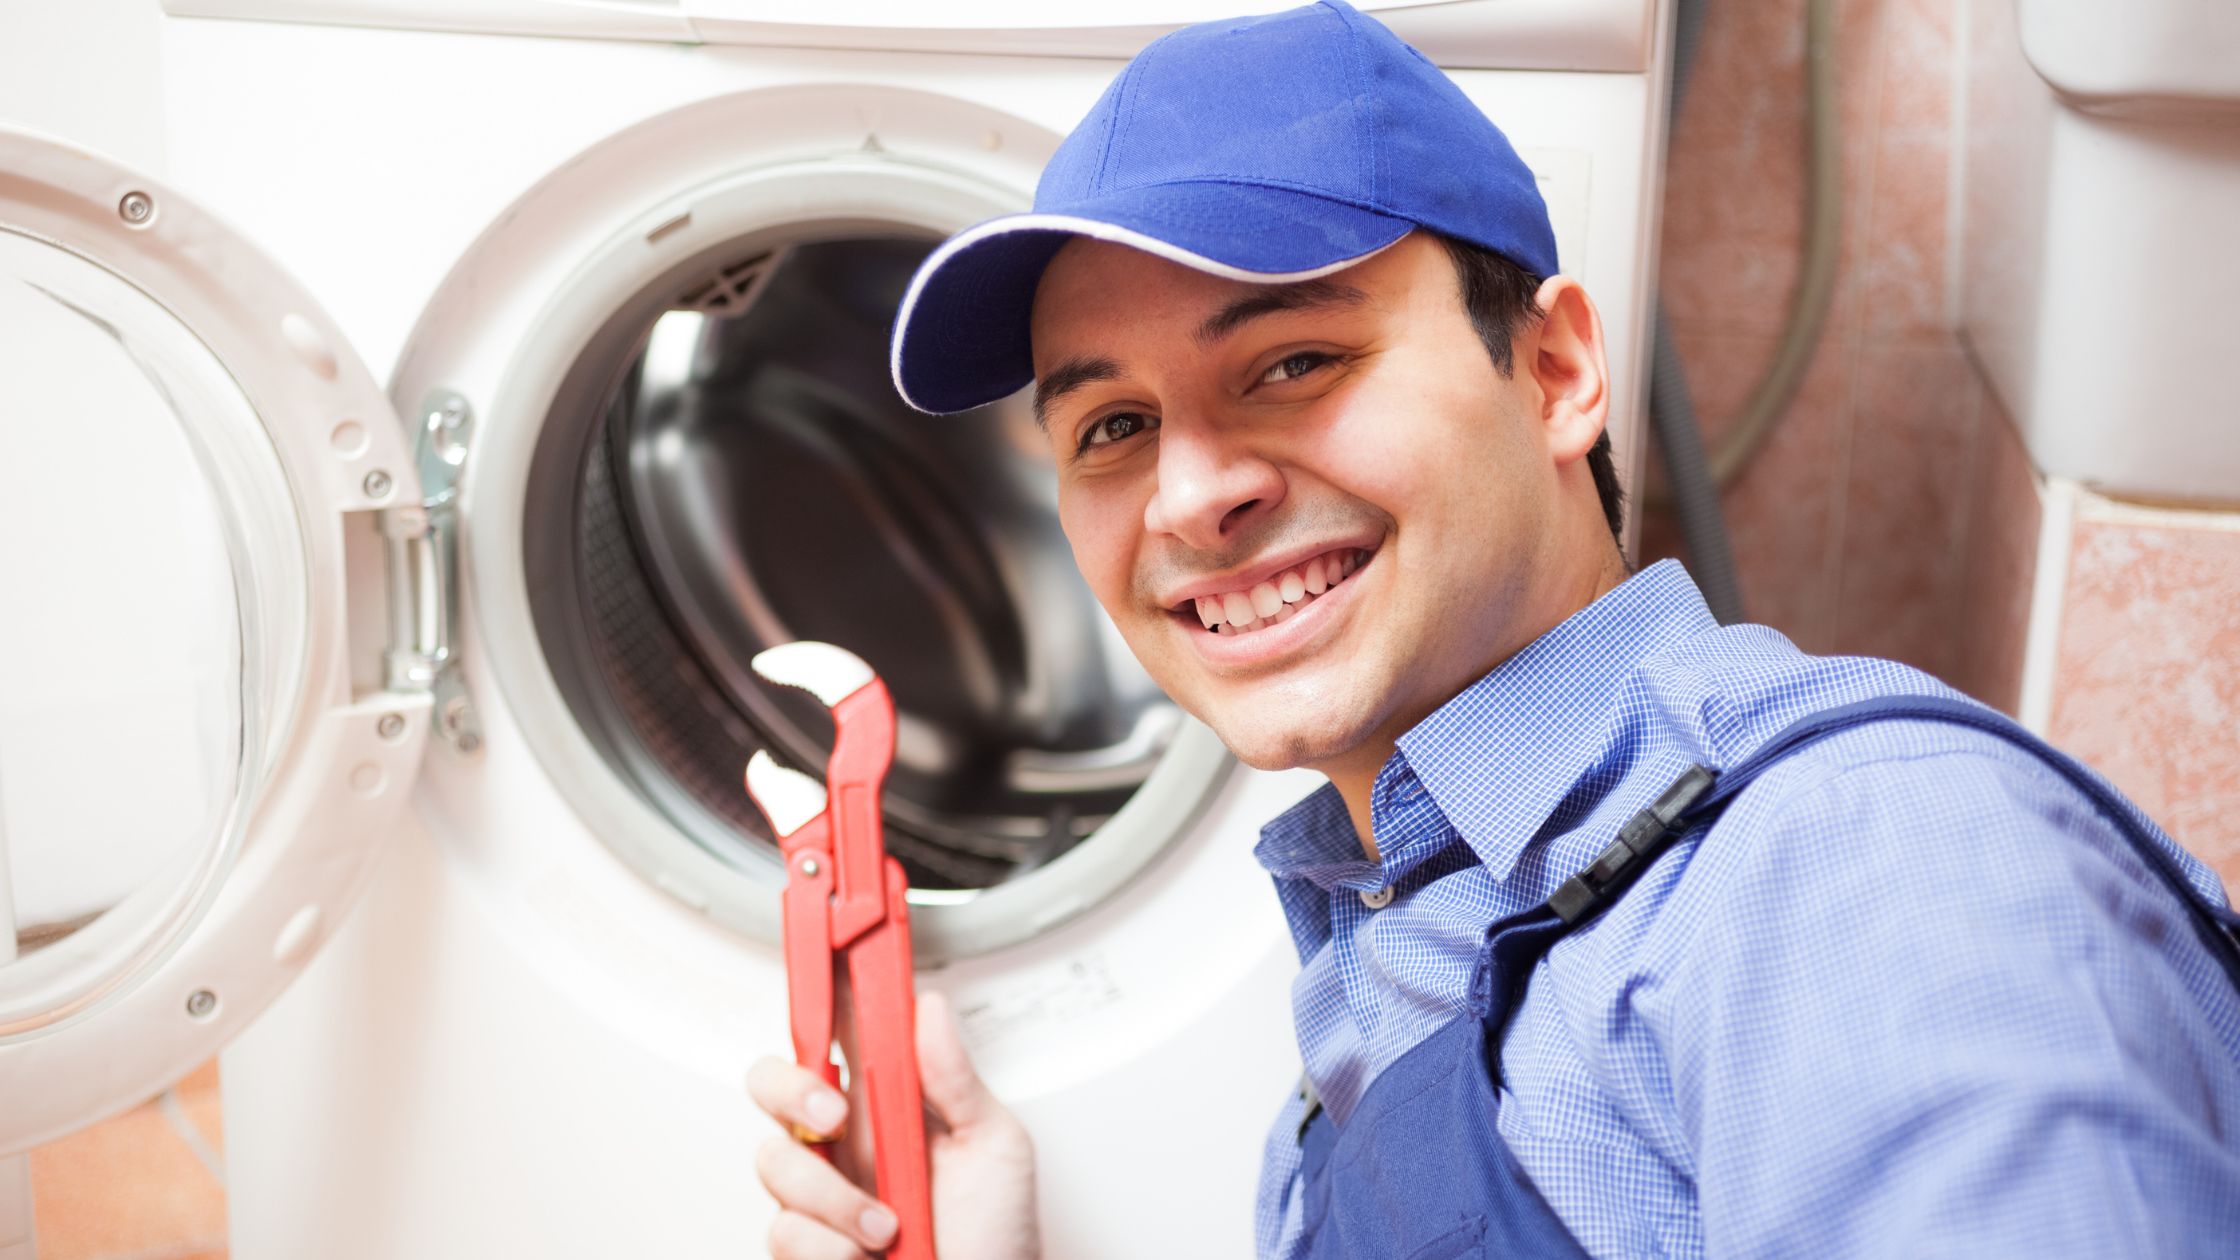 Max Washer and Dryer Repair Experts